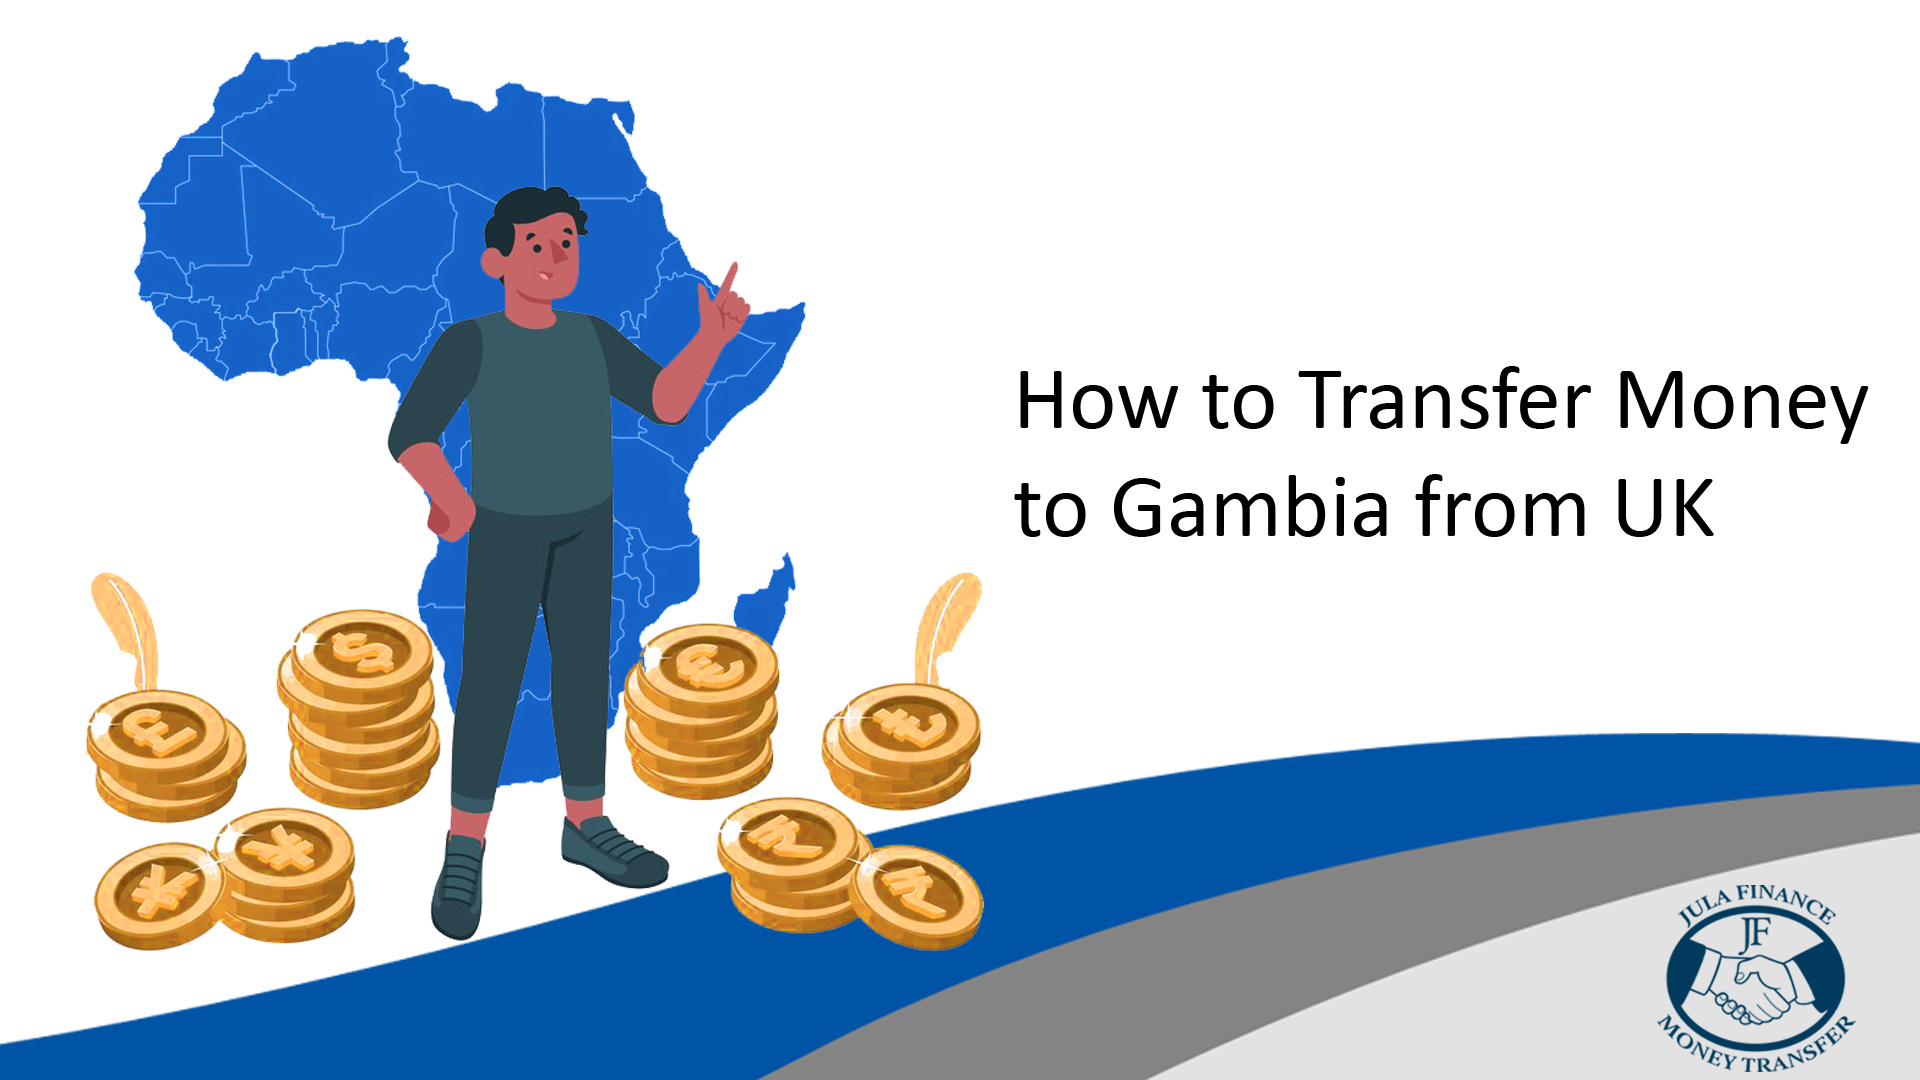 How to Transfer Money to Gambia from UK